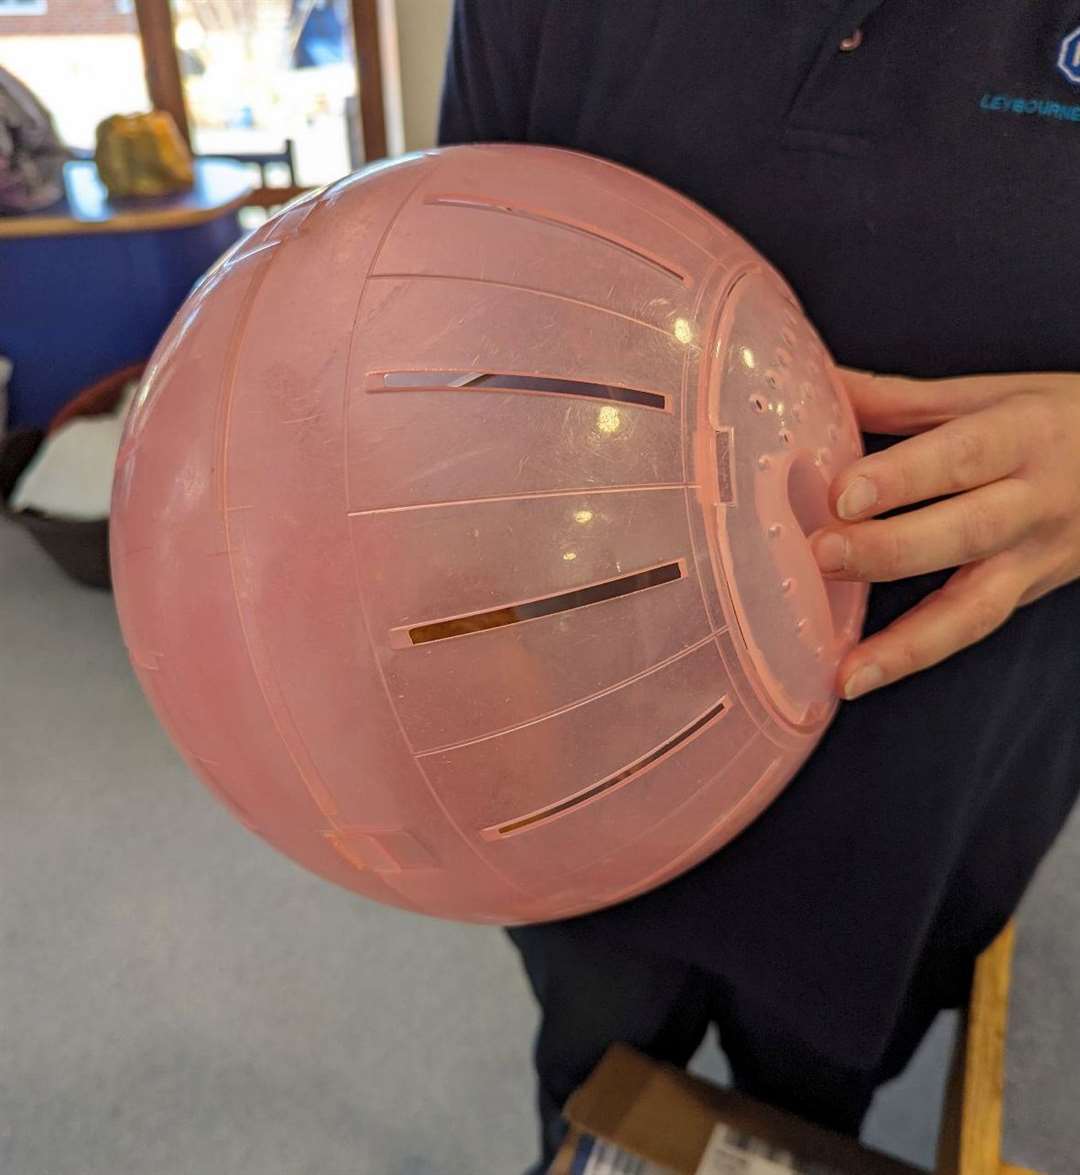 The ginger hamster was locked inside the pink exercise ball. Picture: RSPCA